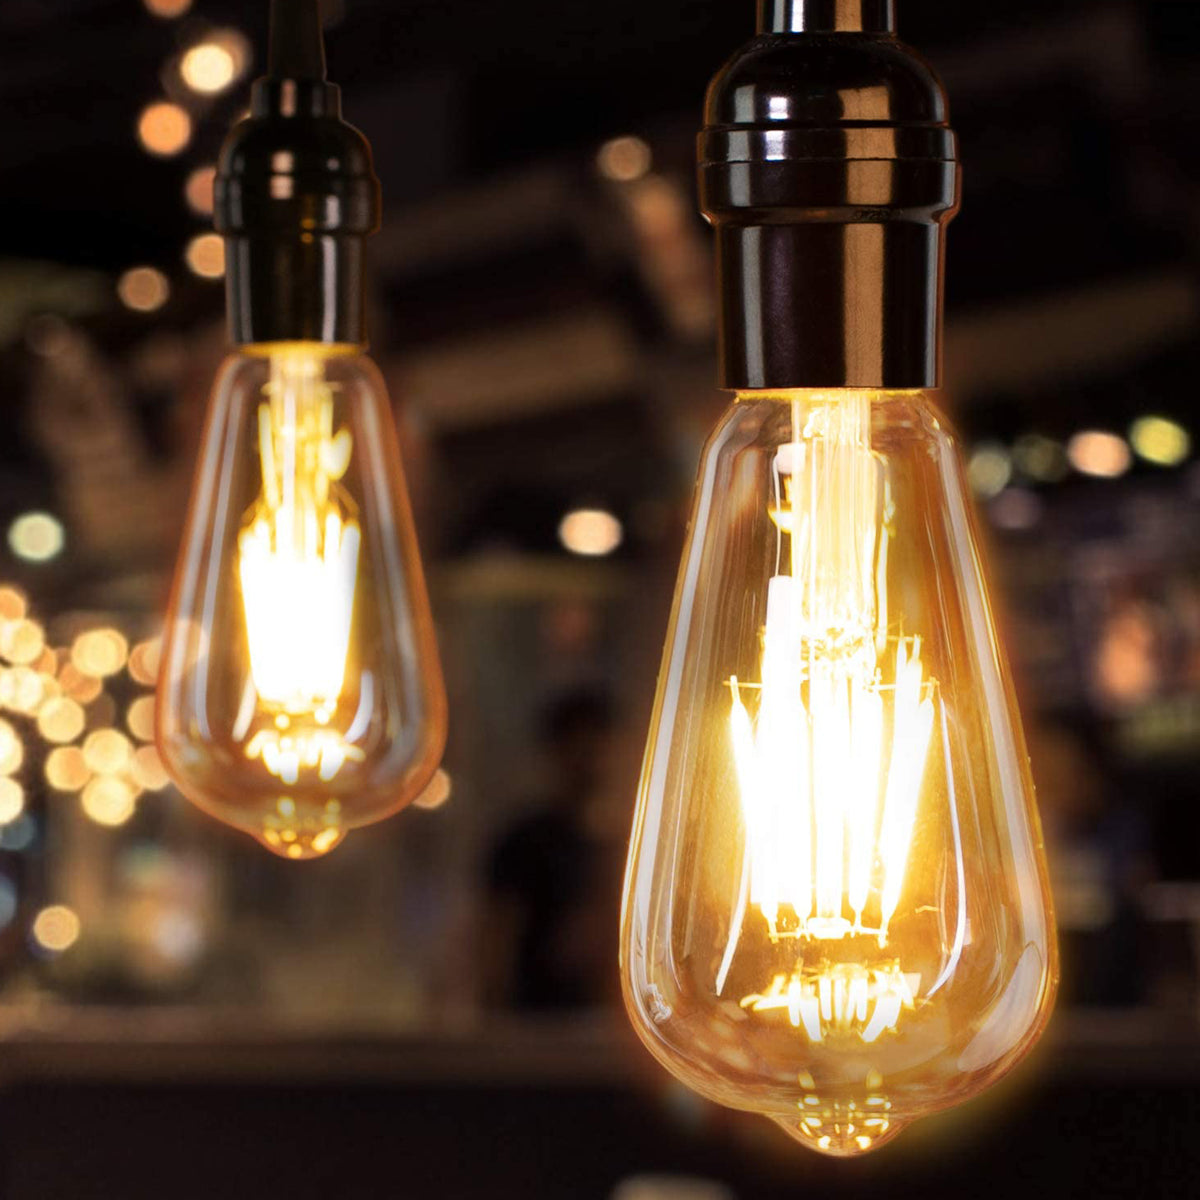 Our warm white LED bulbs have a visible filament for a distinctive look that will complement an array of home decors. Not only is it a decorative feature light bulb, but it also has low energy consumption, making it both practical and ideal for mood lighting.